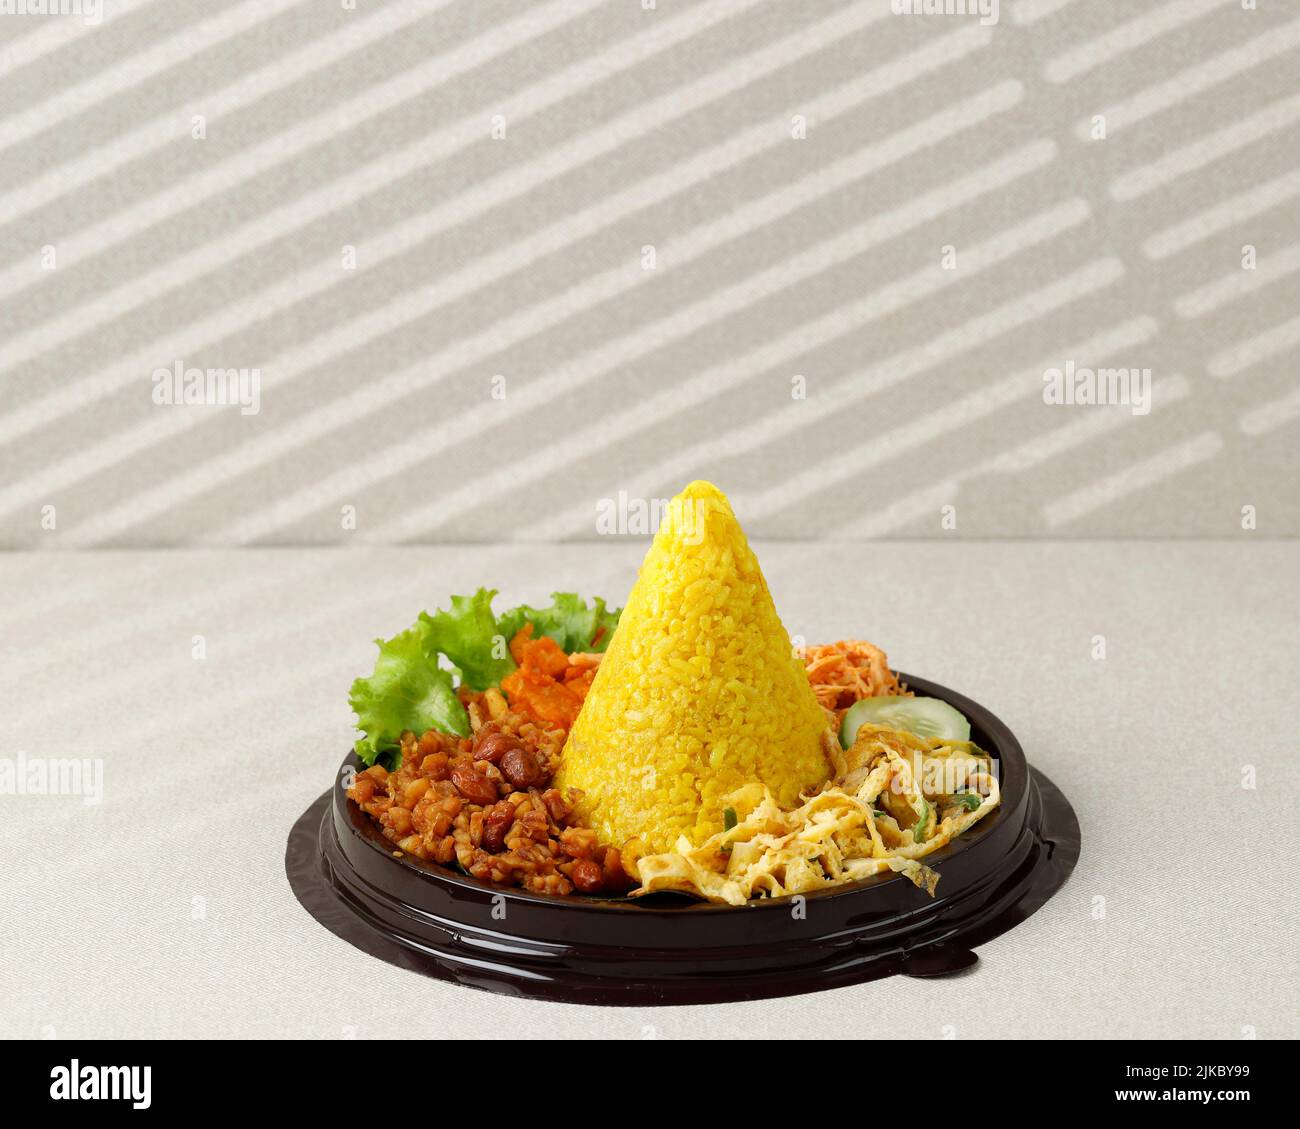 Small Cone Shaped Yellow Rice Or Tumpeng Mini Nasi Kuning. Indonesian Festive Food for Indoneia Independence Day 17 Agustus Stock Photo